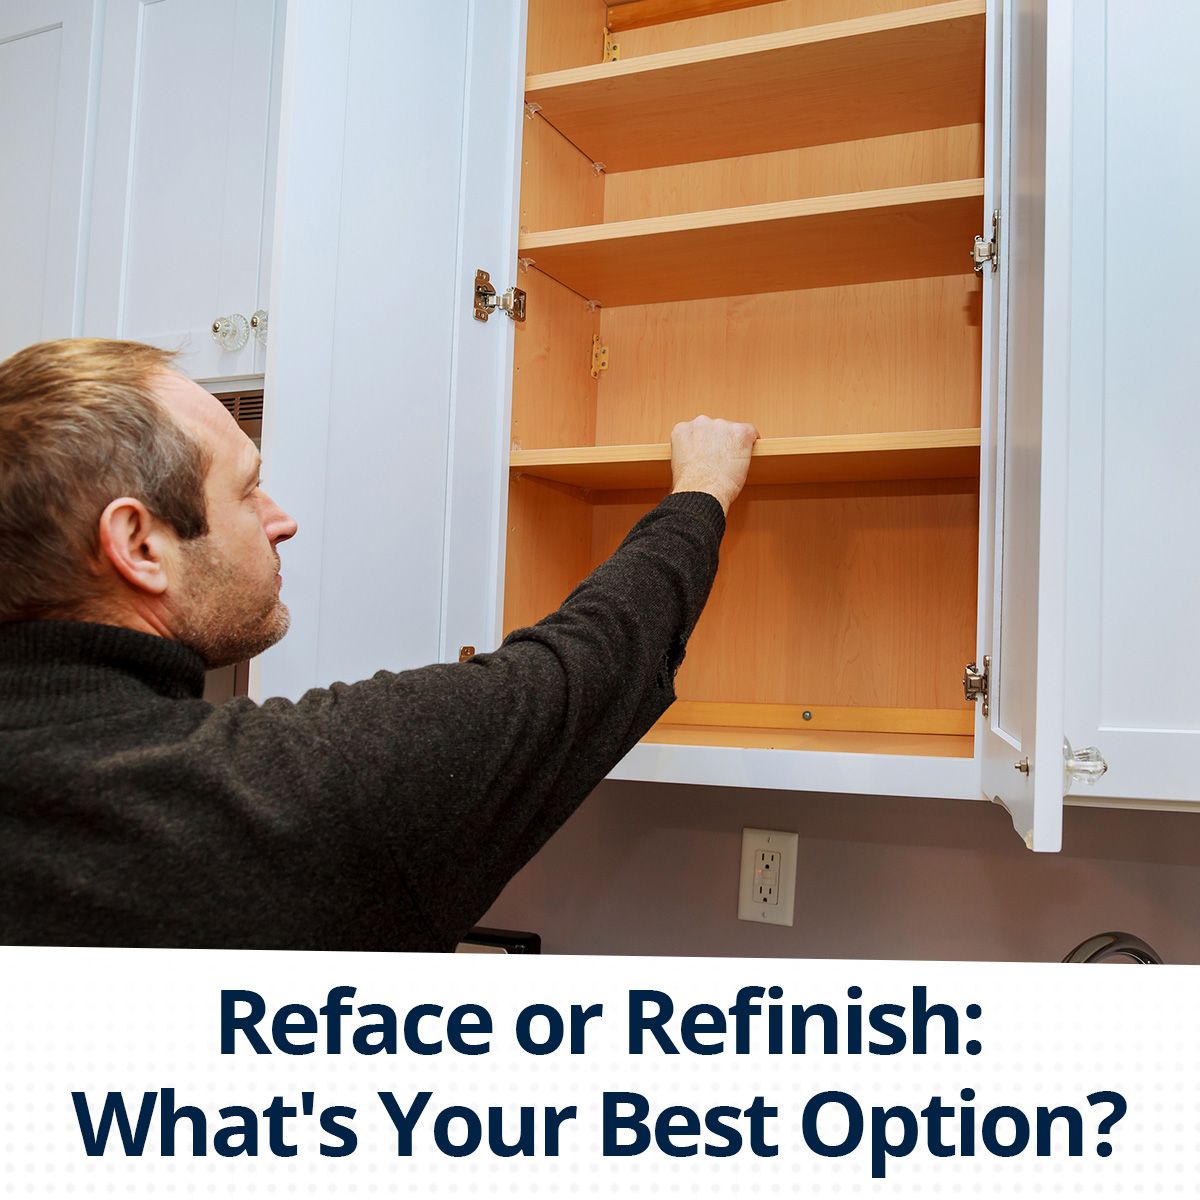 Reface or Refinish: What's Your Best Option?